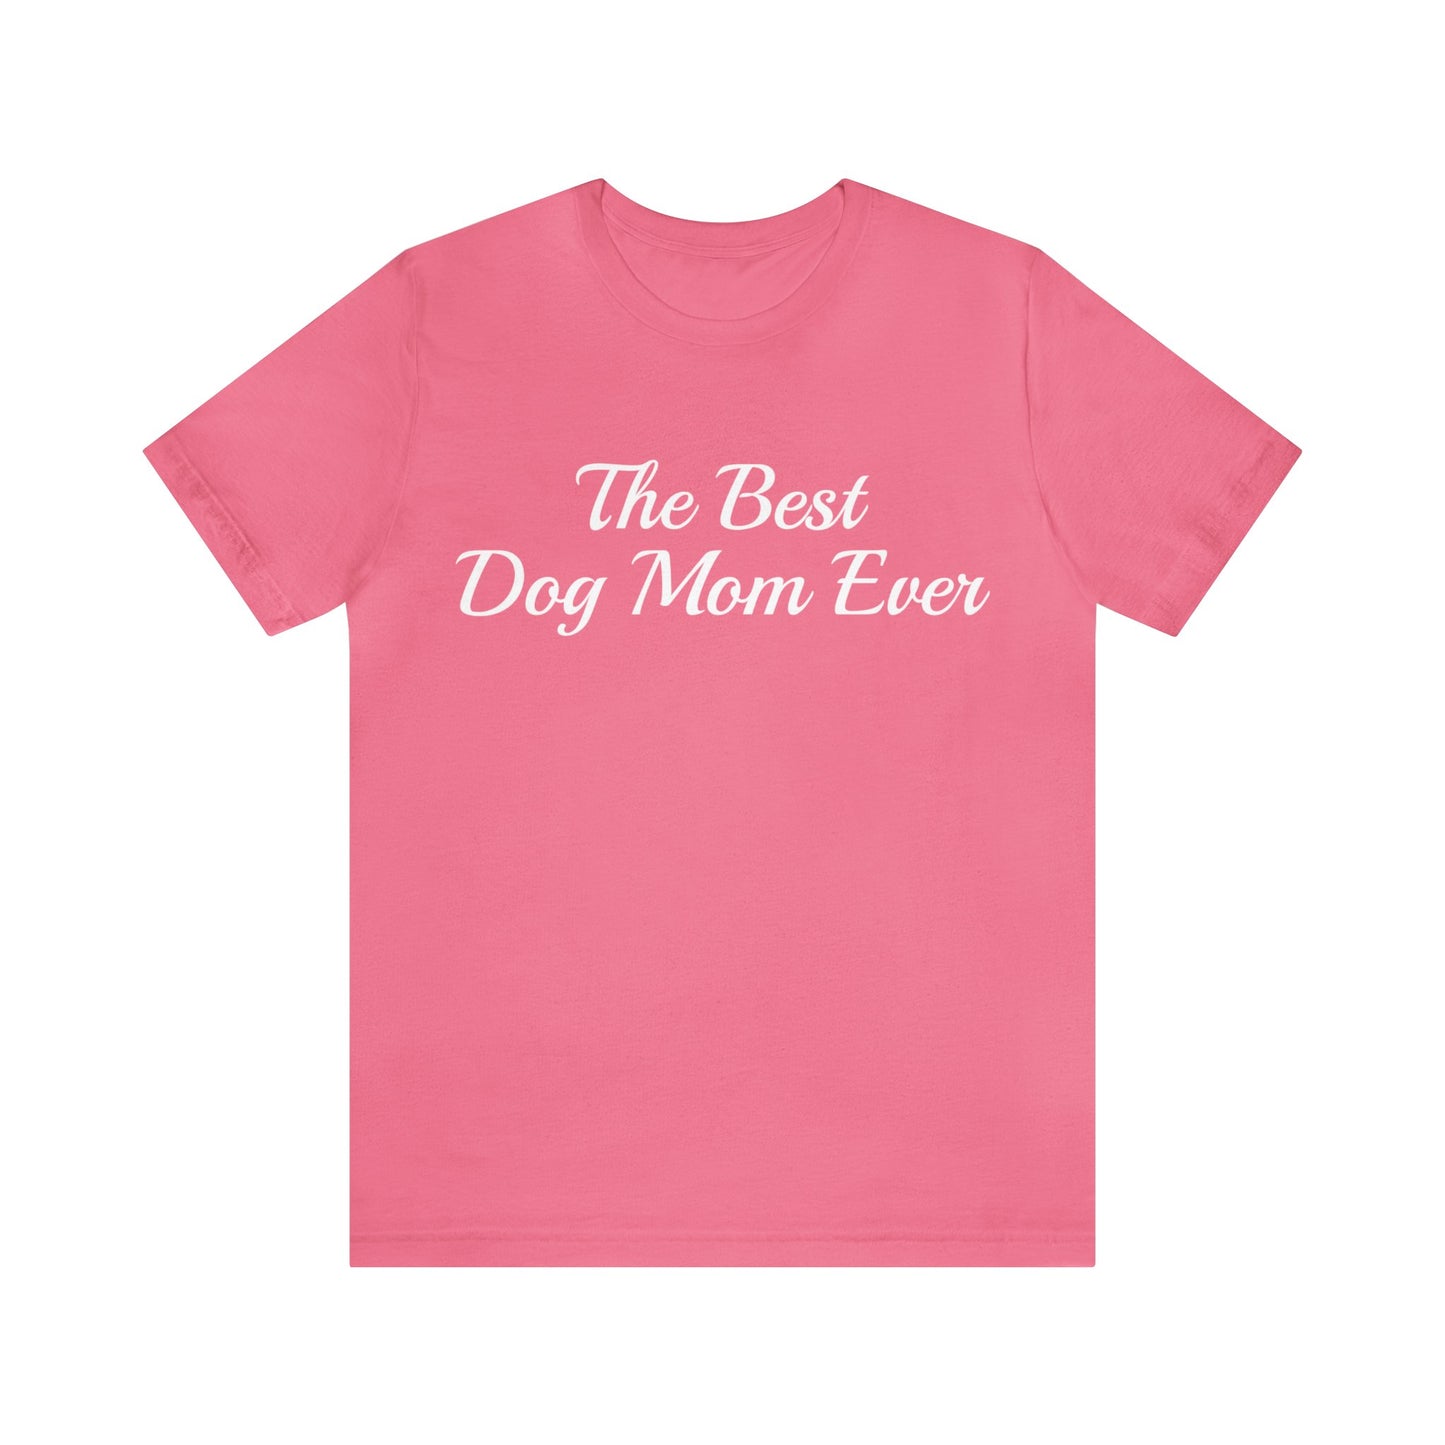 Best Dog Mom Canine Companion Cotton Crew neck Dog Lover dog lover gifts Dog Mom Dog Mom Adventures Dog Mom Apparel Dog Mom Essentials Dog Mom Fashion Dog Mom Goals Dog Mom Happiness Dog Mom Life Dog Mom Life Goals Dog Mom Life Is Ruff Dog Mom Lifestyle Dog Mom Power Dog Mom Pride Dog Mom Squad Dog Mom Tribe Dog Mom Vibes Dog Momma Dog Parenting Dog tshirts Fur Baby Bond Fur Baby Love Meaningful Gift Pawfectly Devoted Stylish Comfort T-shirts Unconditional Love Unisex